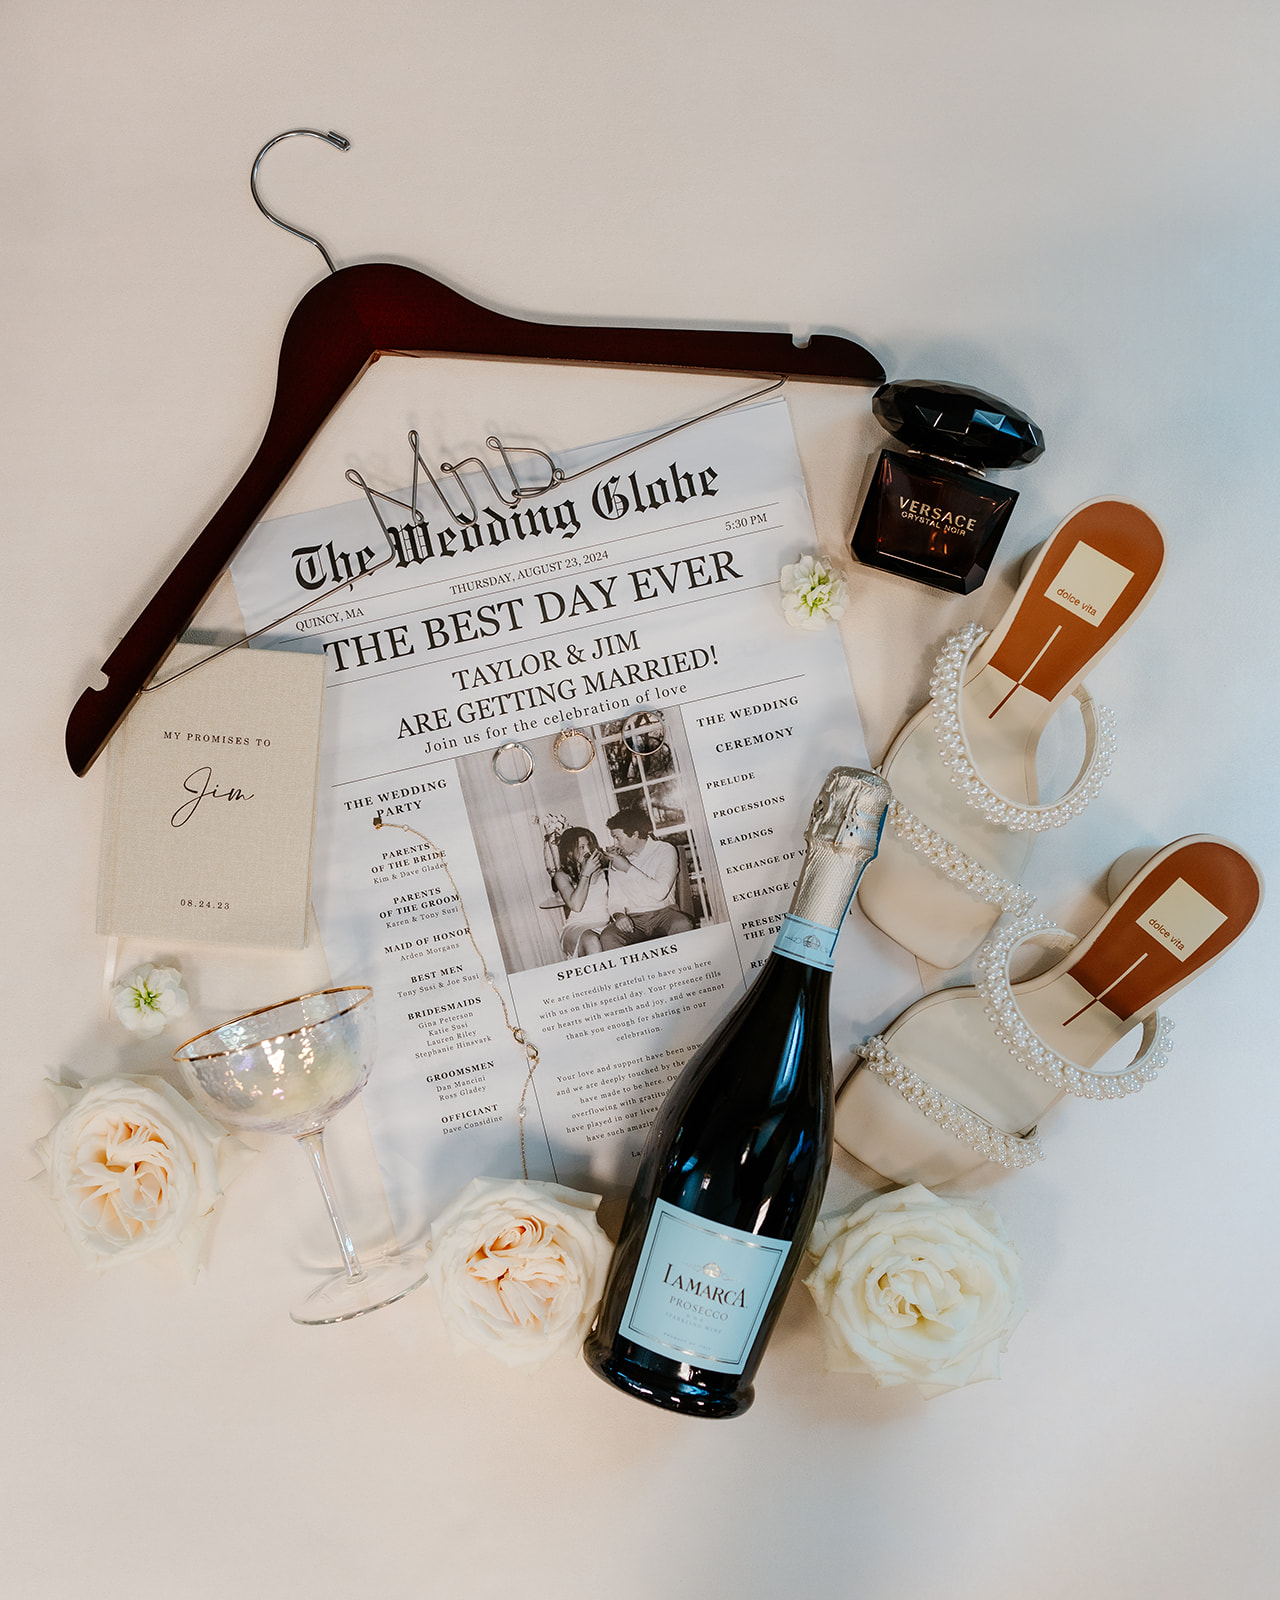 A bottle of champagne, a newspaper, a hanger that says mrs, bridal shoes and perfume